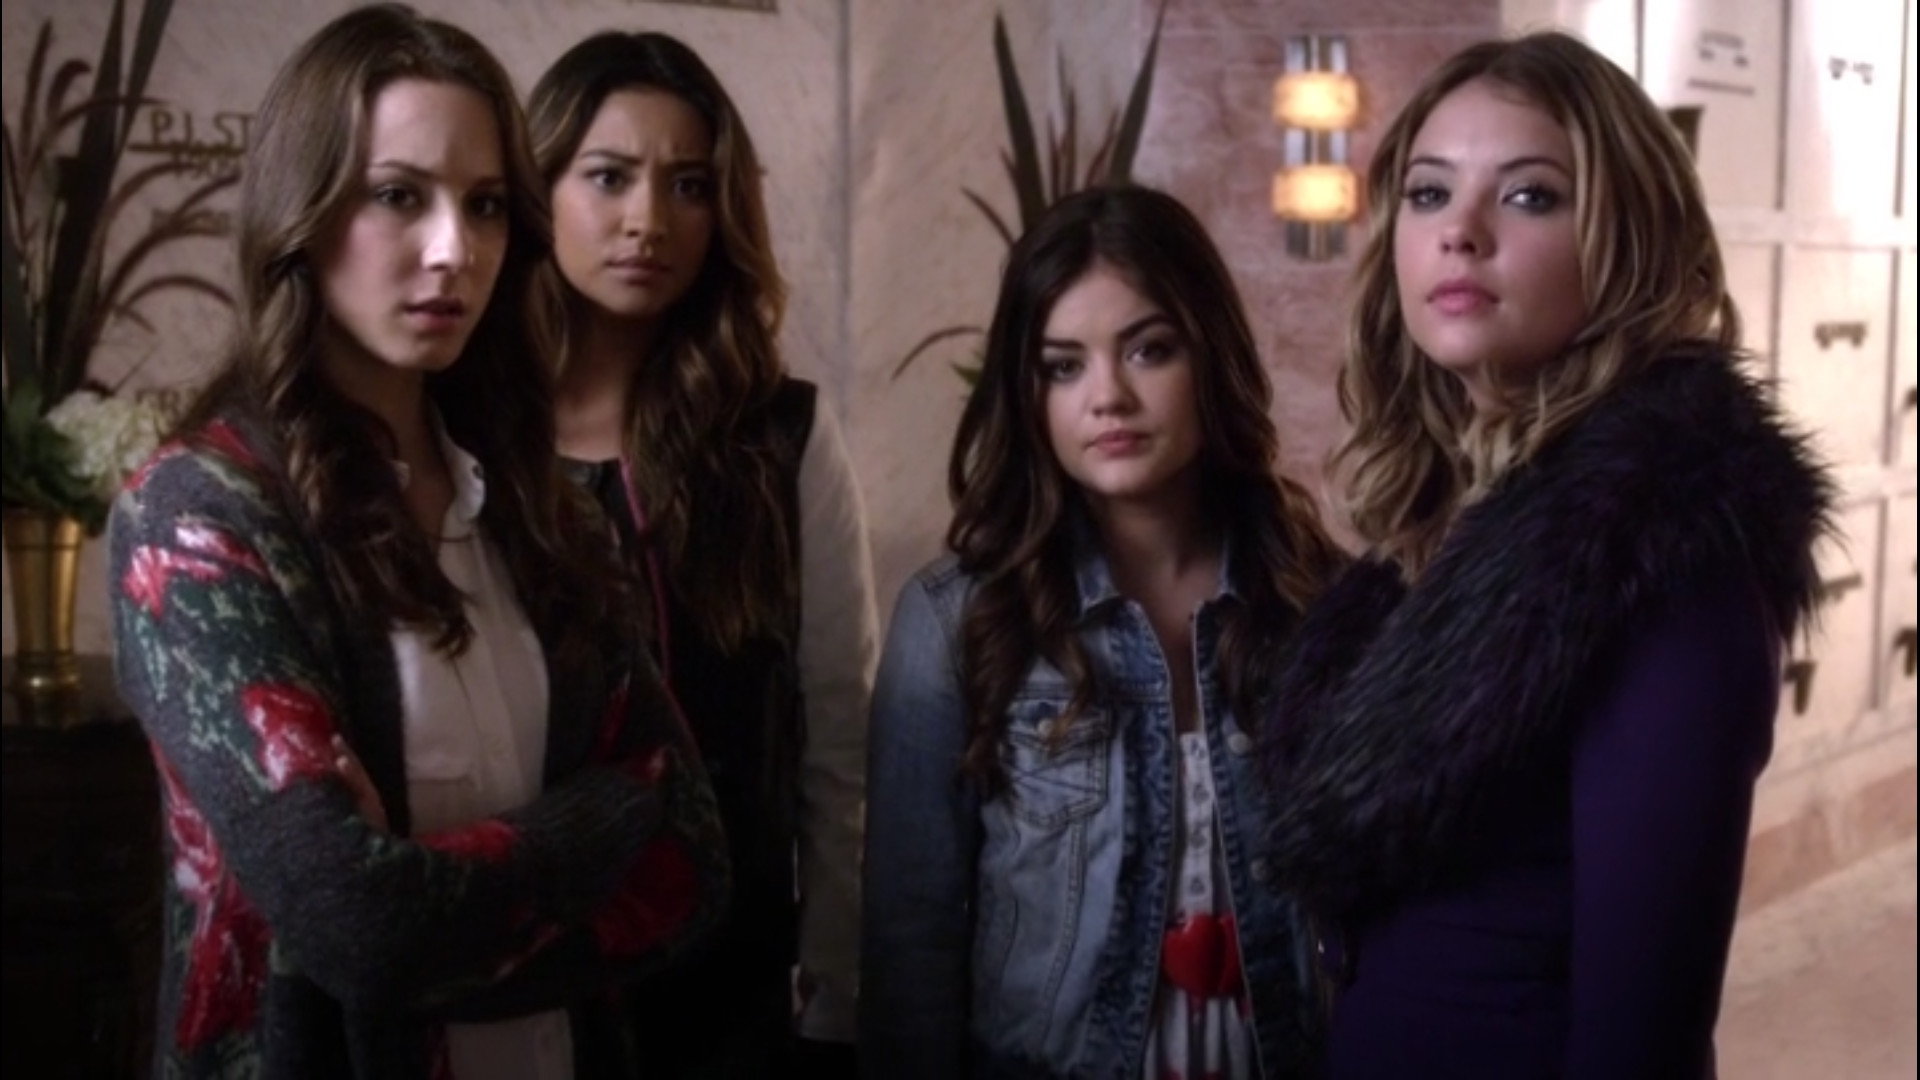 1920x1080 Pretty Little Liars "Who's in the Box?" Review: Dangerous Minds  (Cyberbully's Paradise) - TV.com